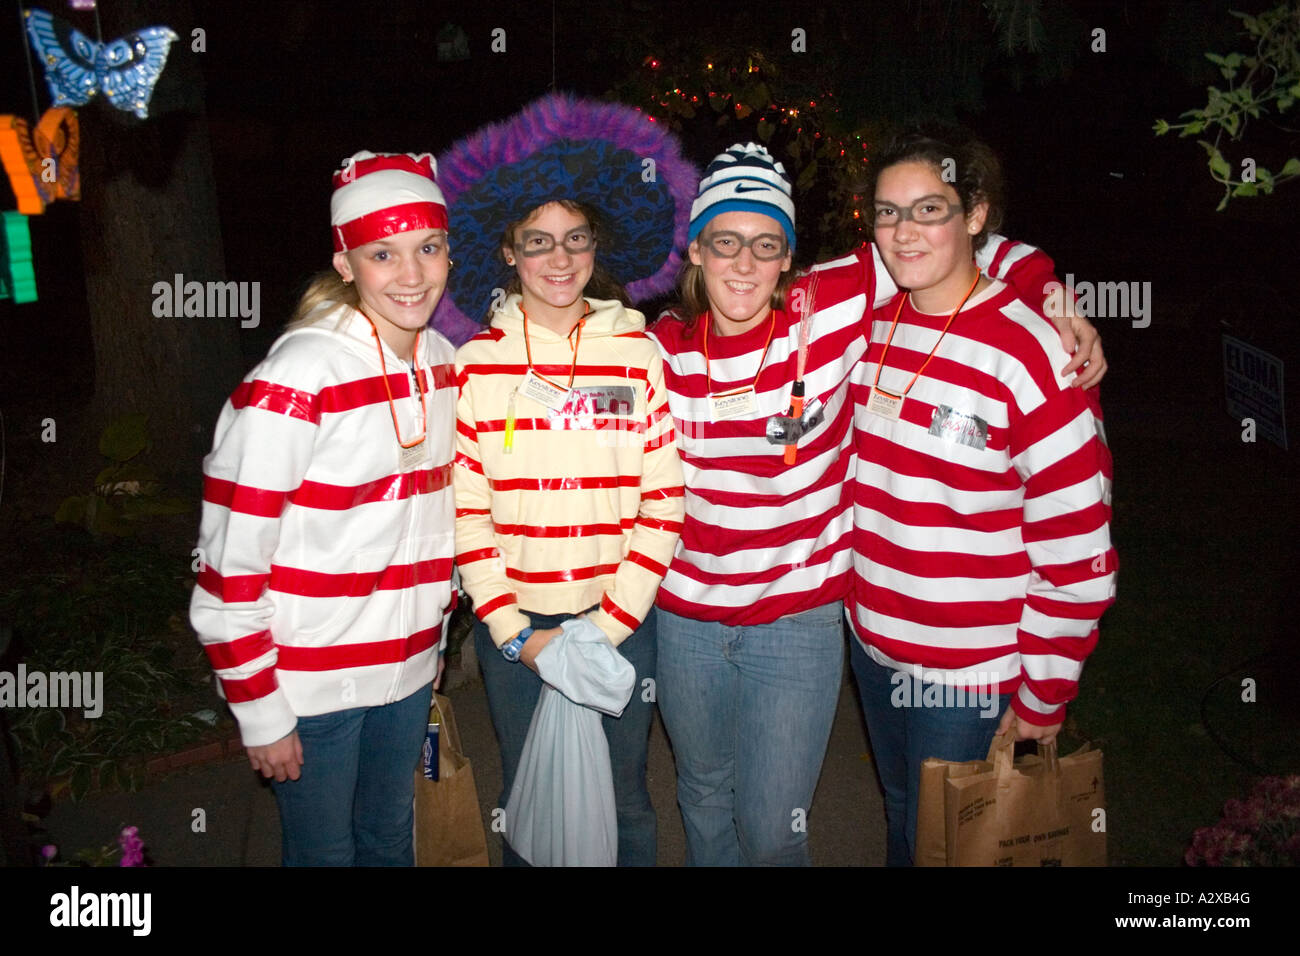 Halloween Keystone convict prisoner trick and treaters in red striped costumes age 18. St Paul Minnesota USA Stock Photo